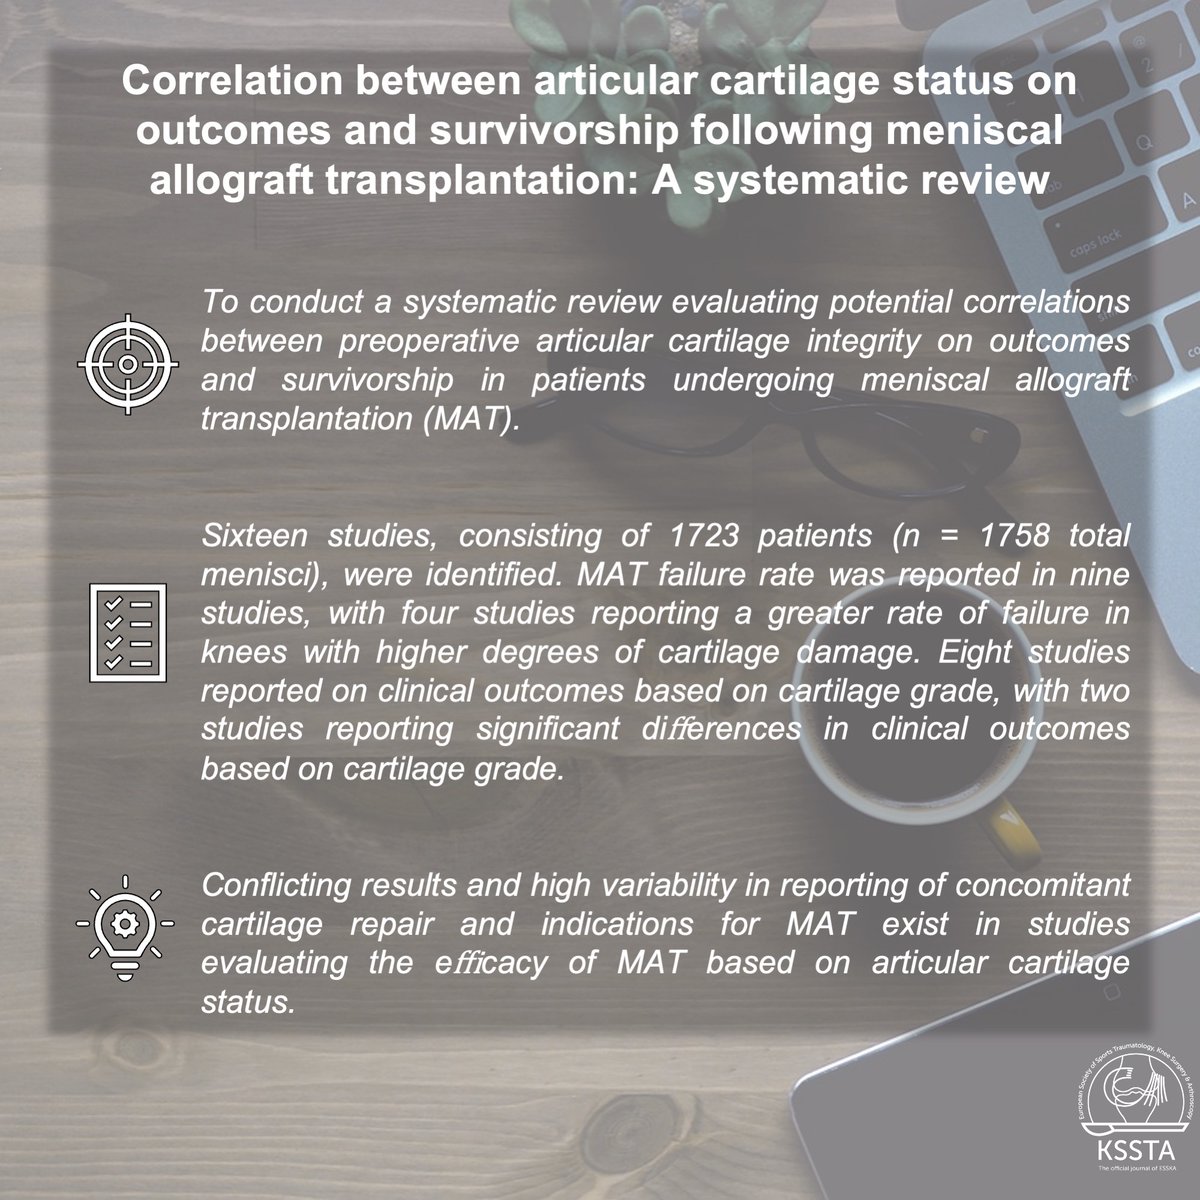 The influence of preoperative cartilage status on postoperative outcome after MAT is still unclear, according to this systematic review. #cartilage #knee #allograft #MAT #transplantation Read here: doi.org/10.1002/ksa.12…